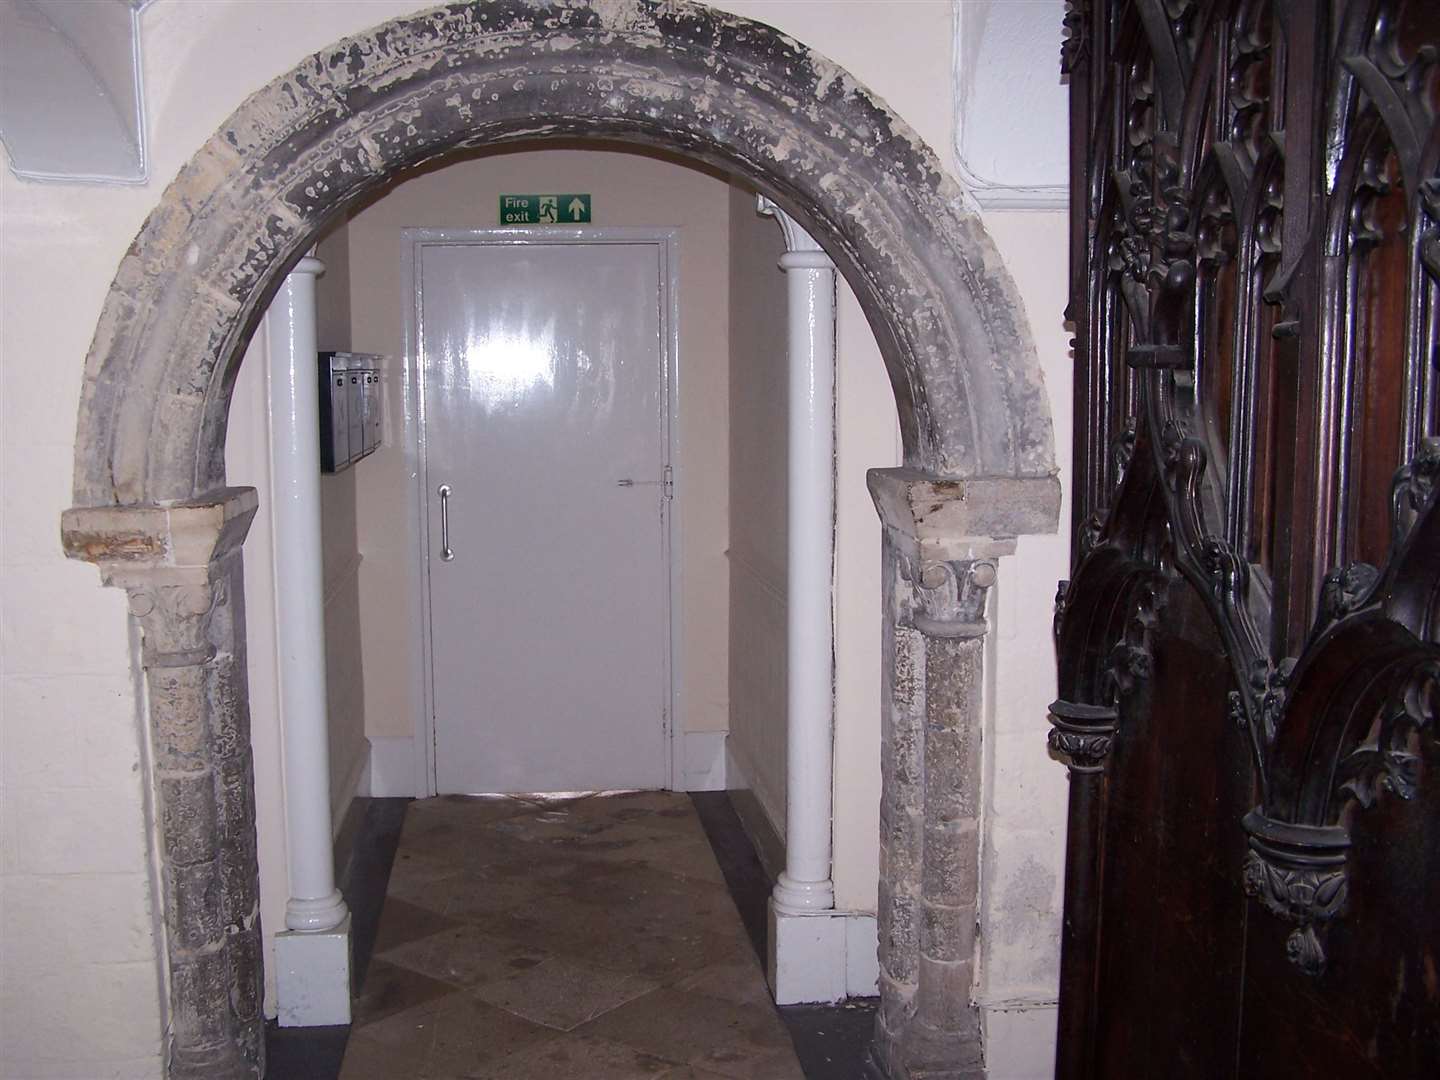 The 12th century doorway inside 79 Guildhall Street, the Norman House